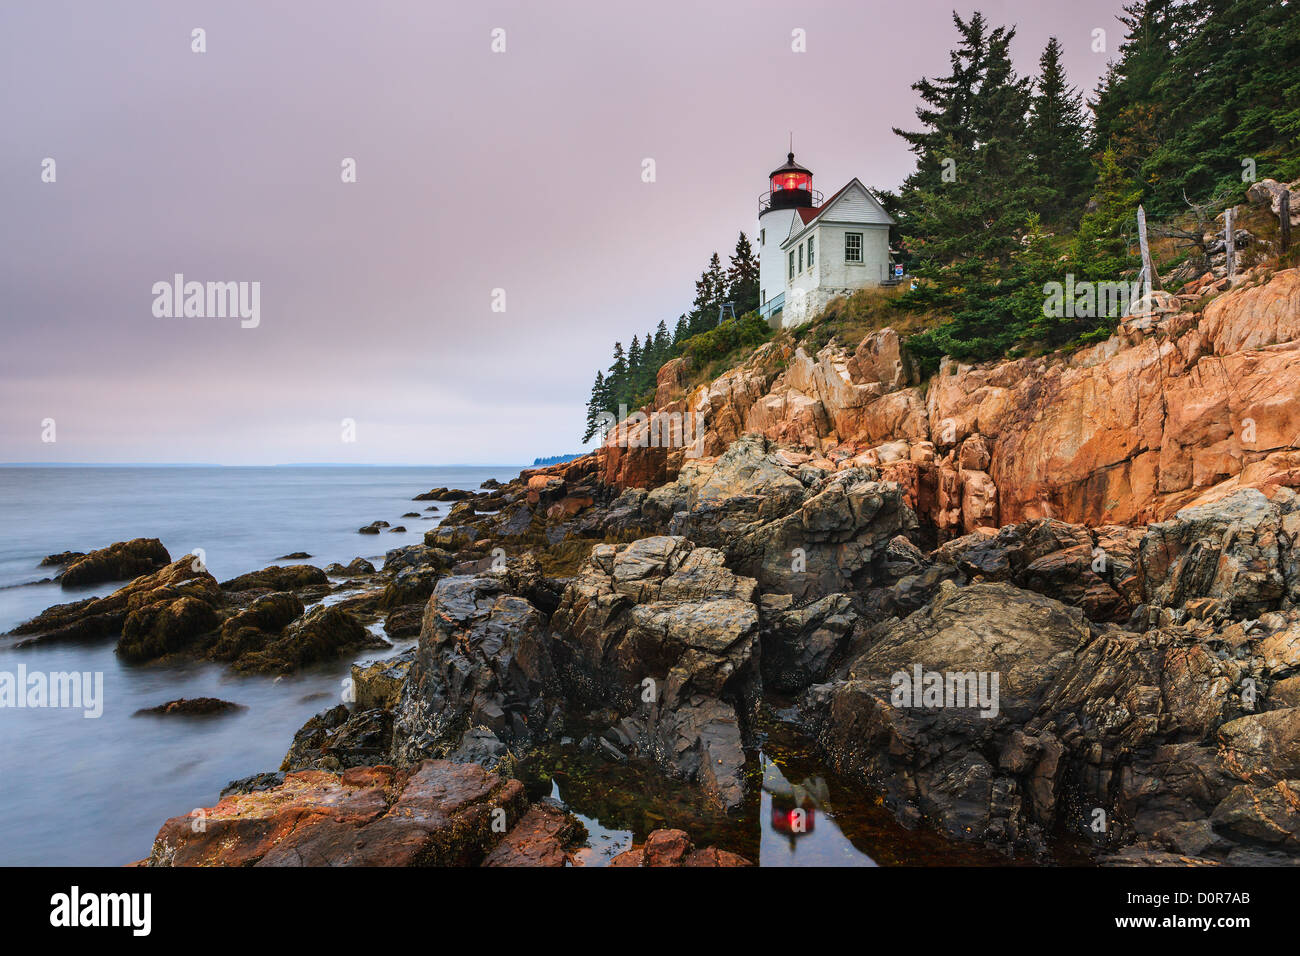 Bass Harbor Head Light, Acadia, Maine, USA Banque D'Images